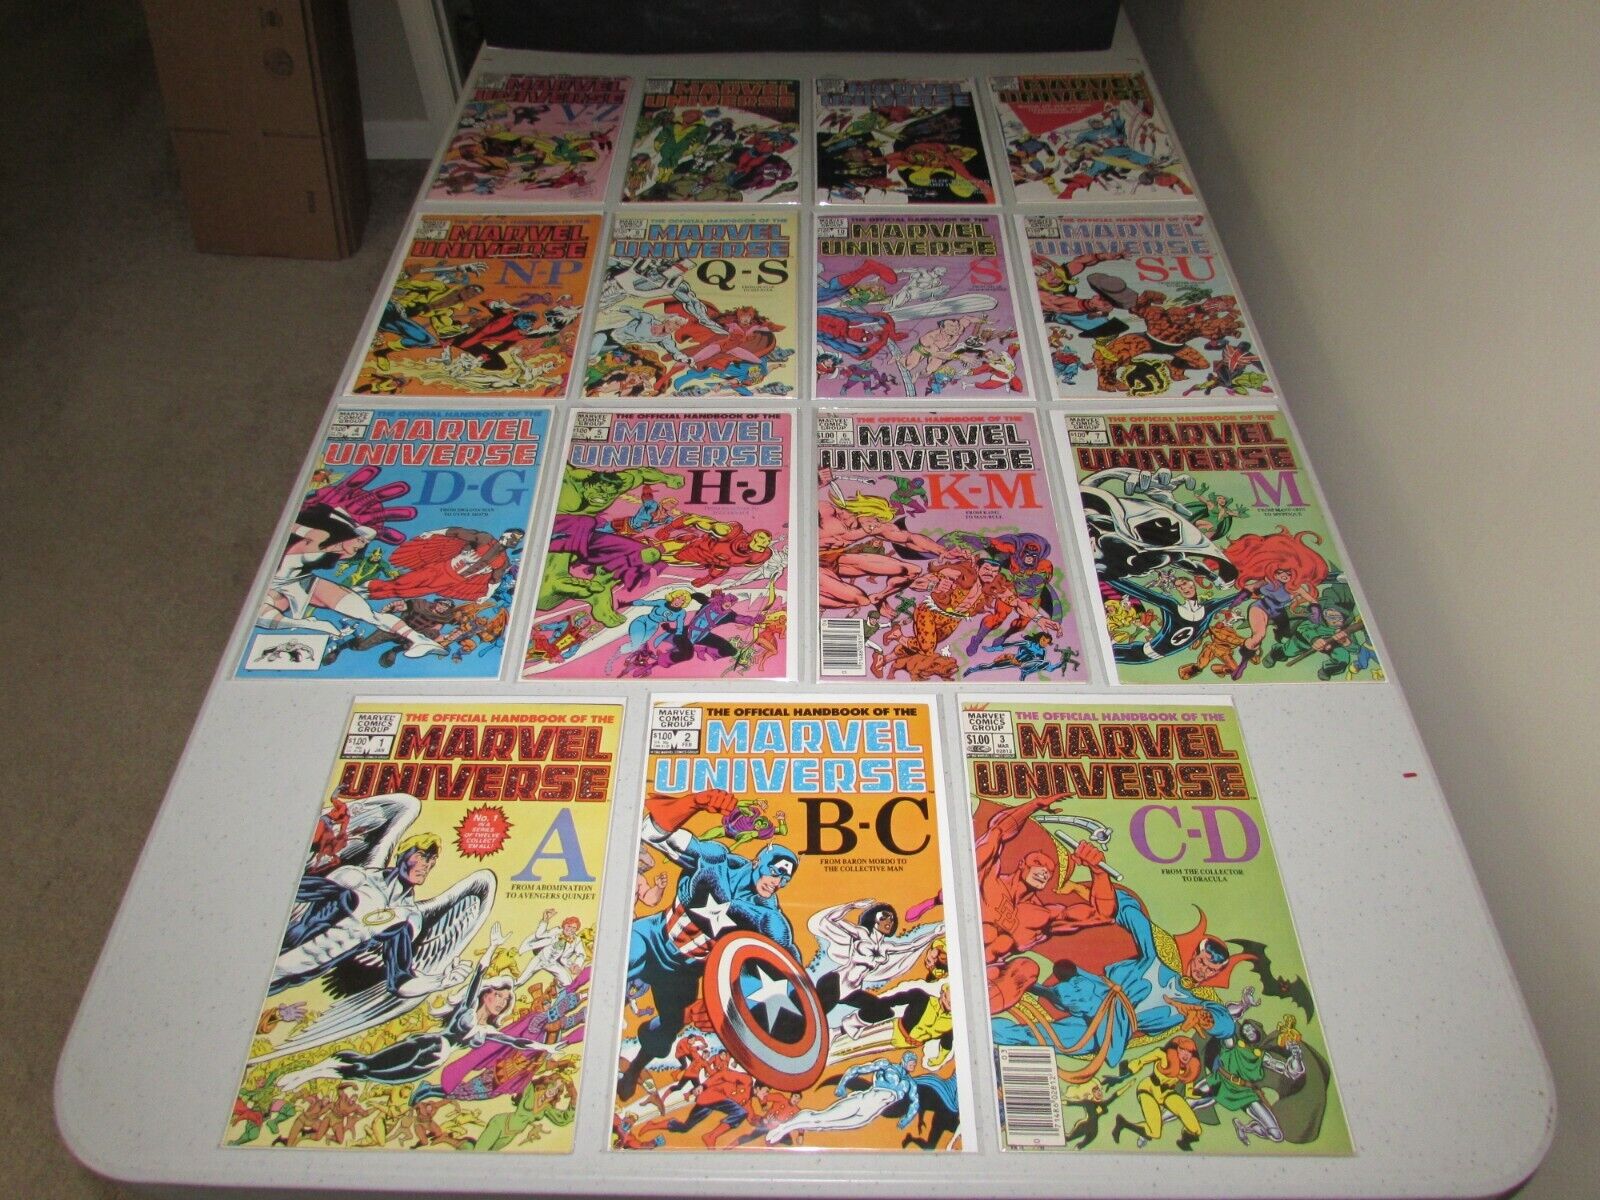 OFFICIAL HANDBOOK OF THE MARVEL UNIVERSE  #1 - 15  (Complete Series)  